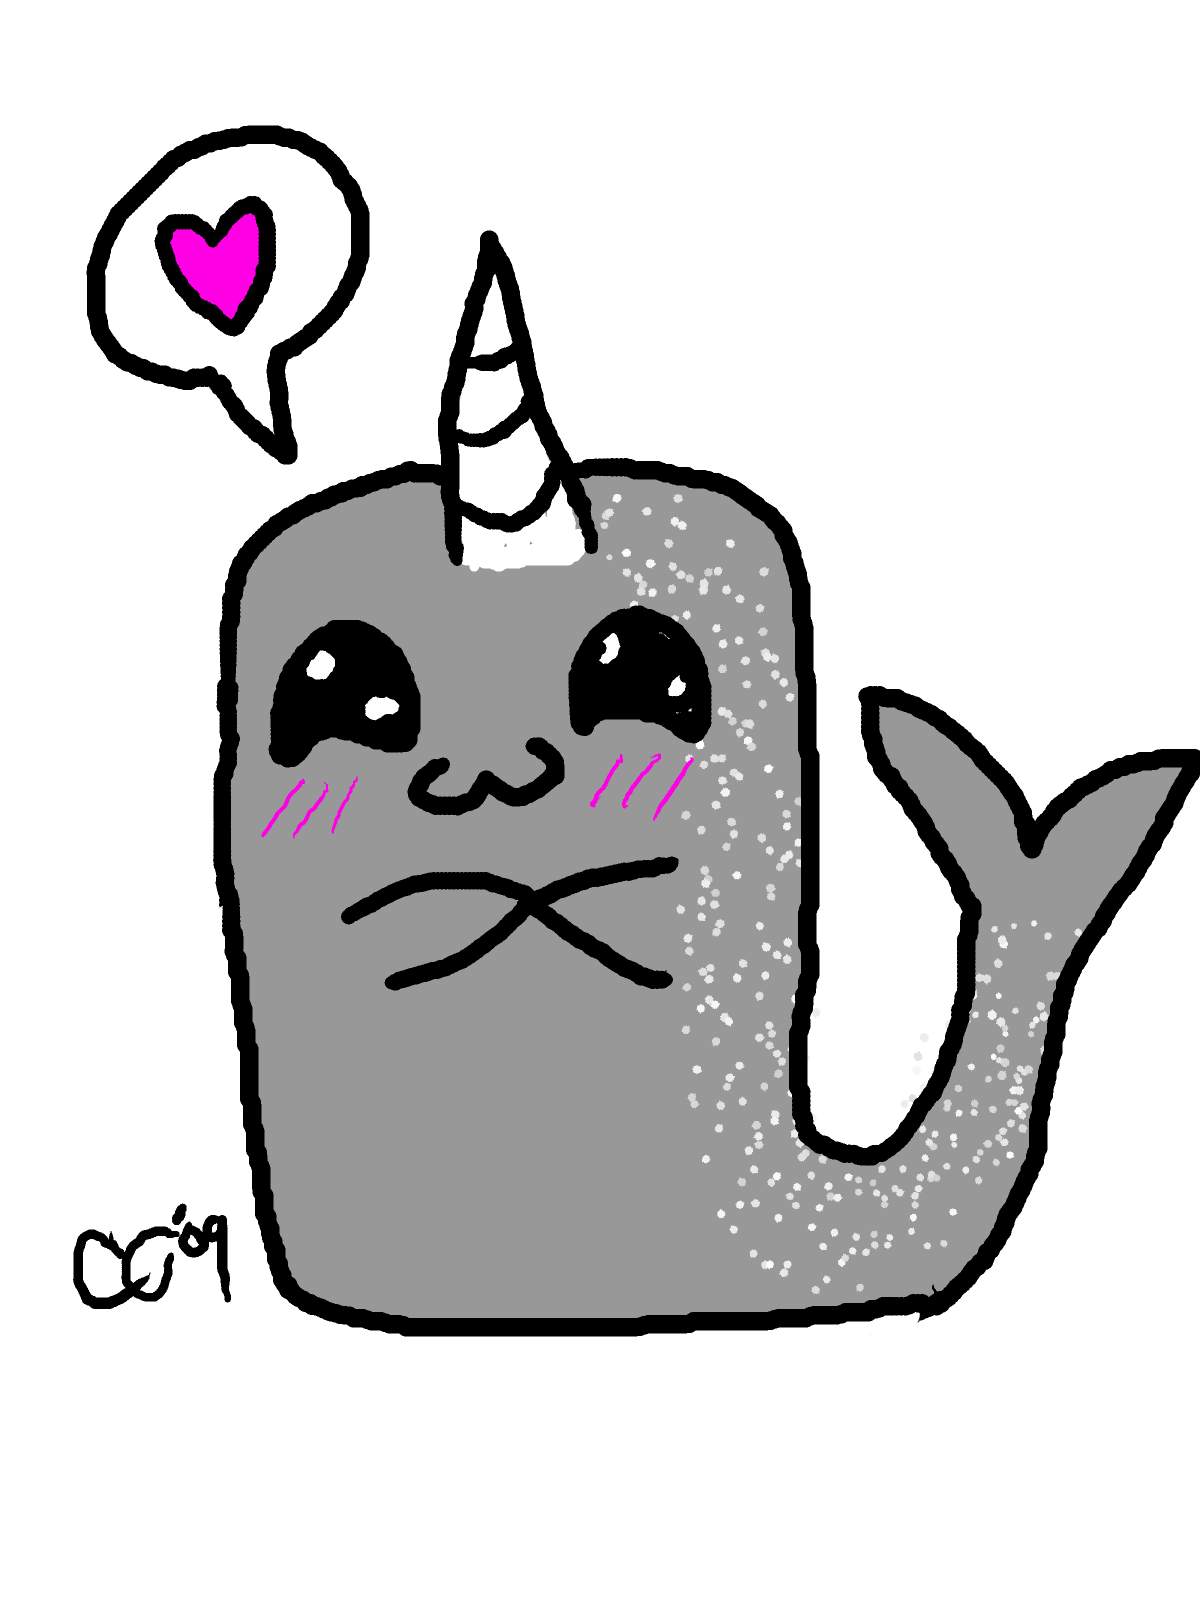 horn clipart narwhal